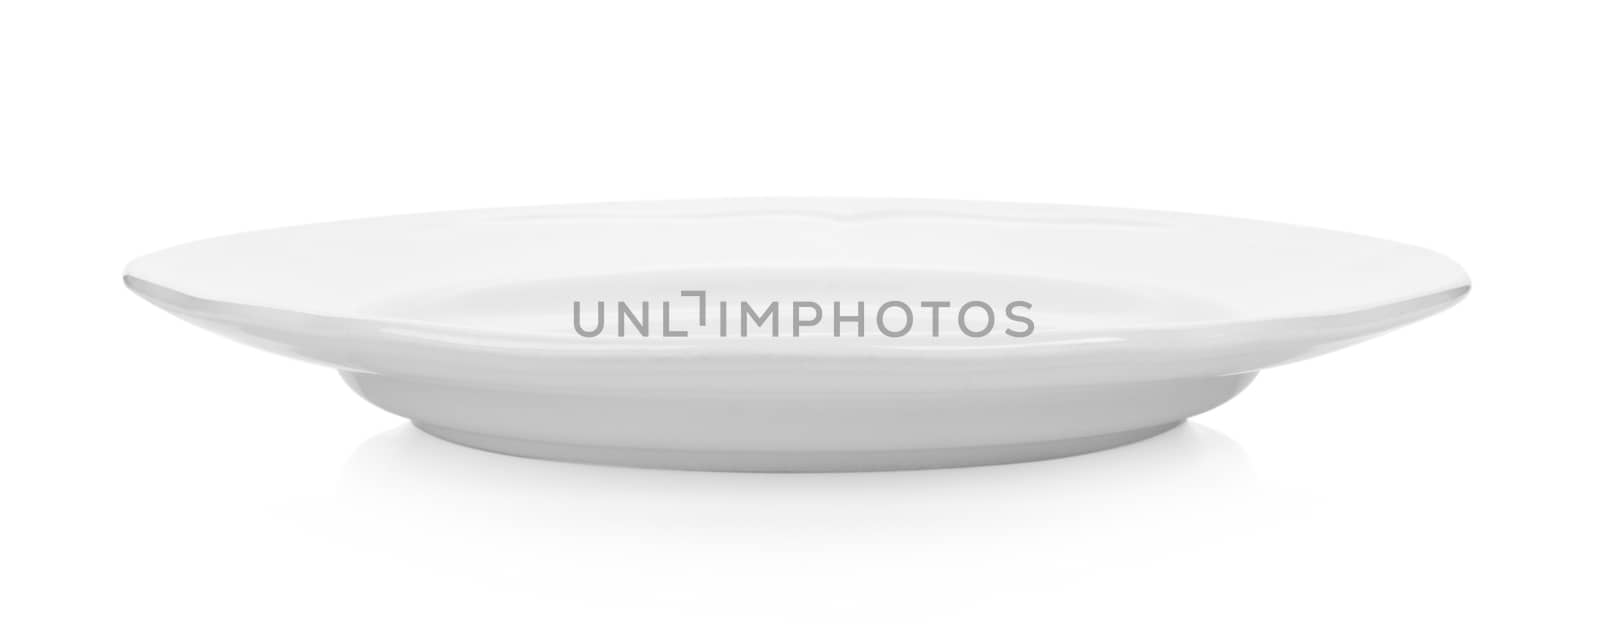 collection of white plate on white background by sommai